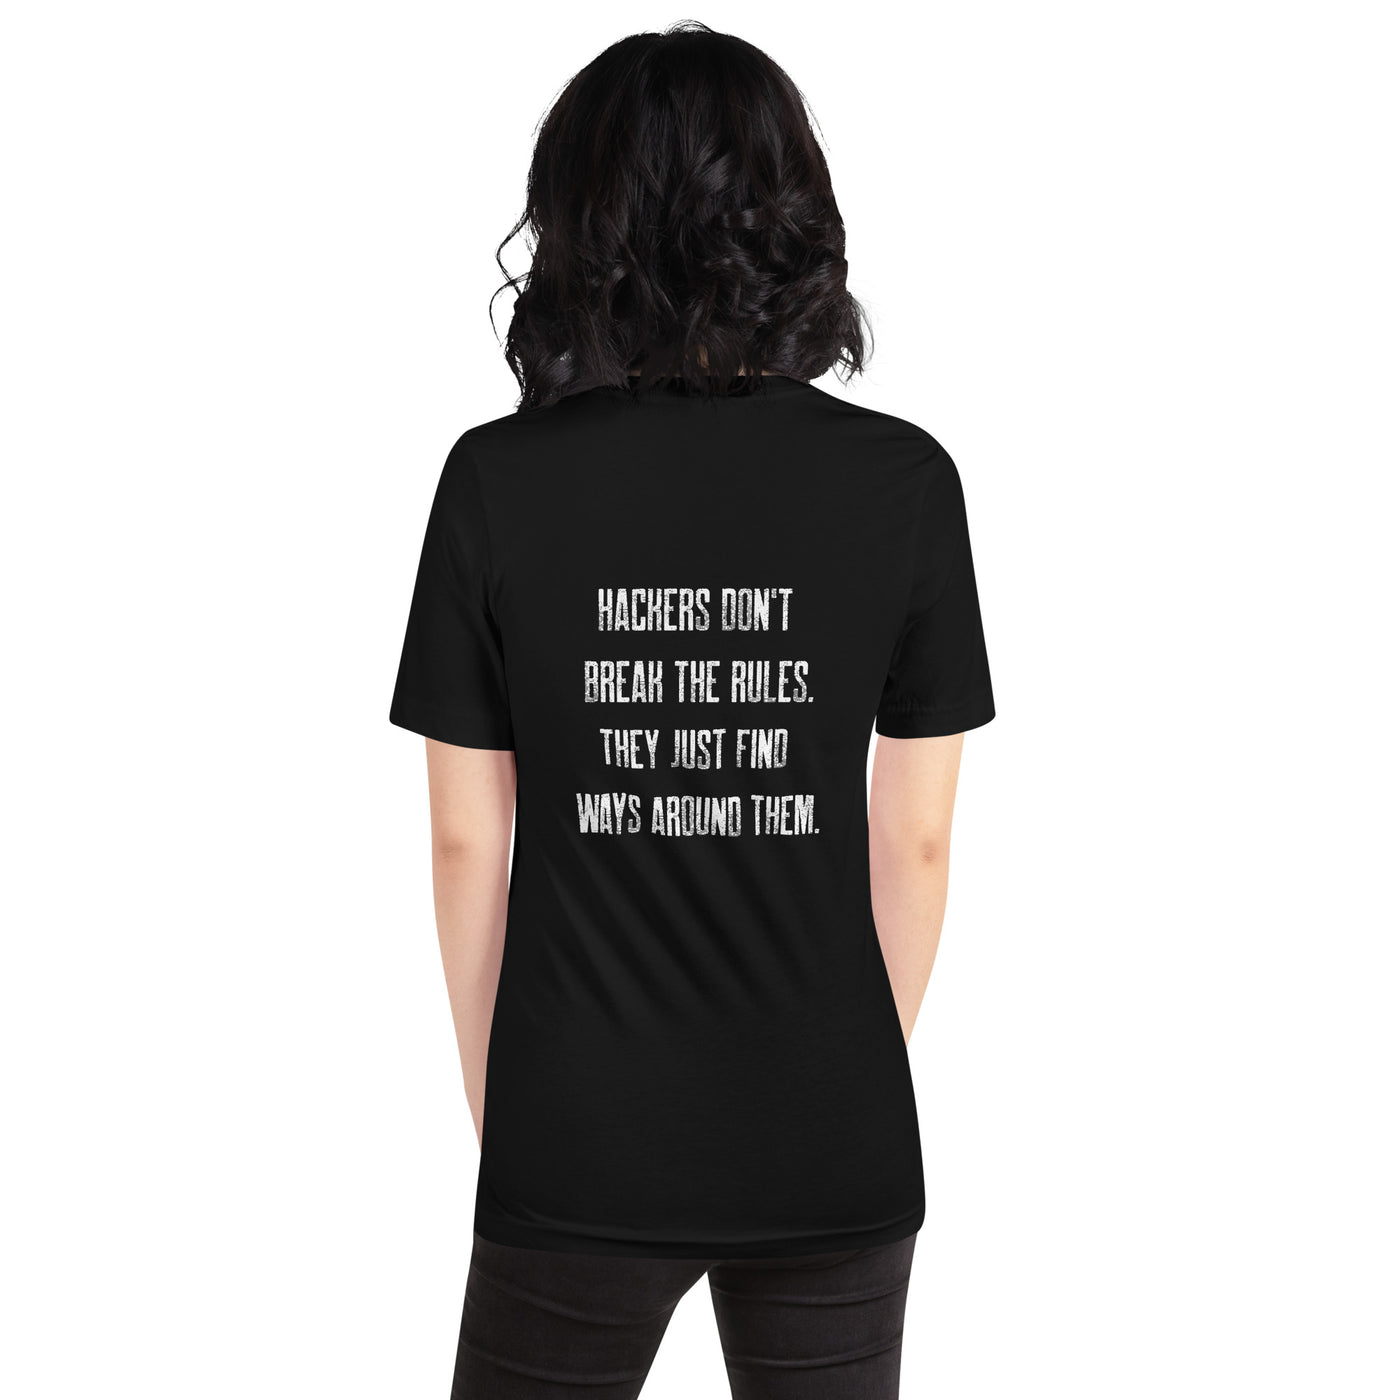 Hackers don't break the rules, they just find ways around them V1 - Unisex t-shirt ( Back Print )